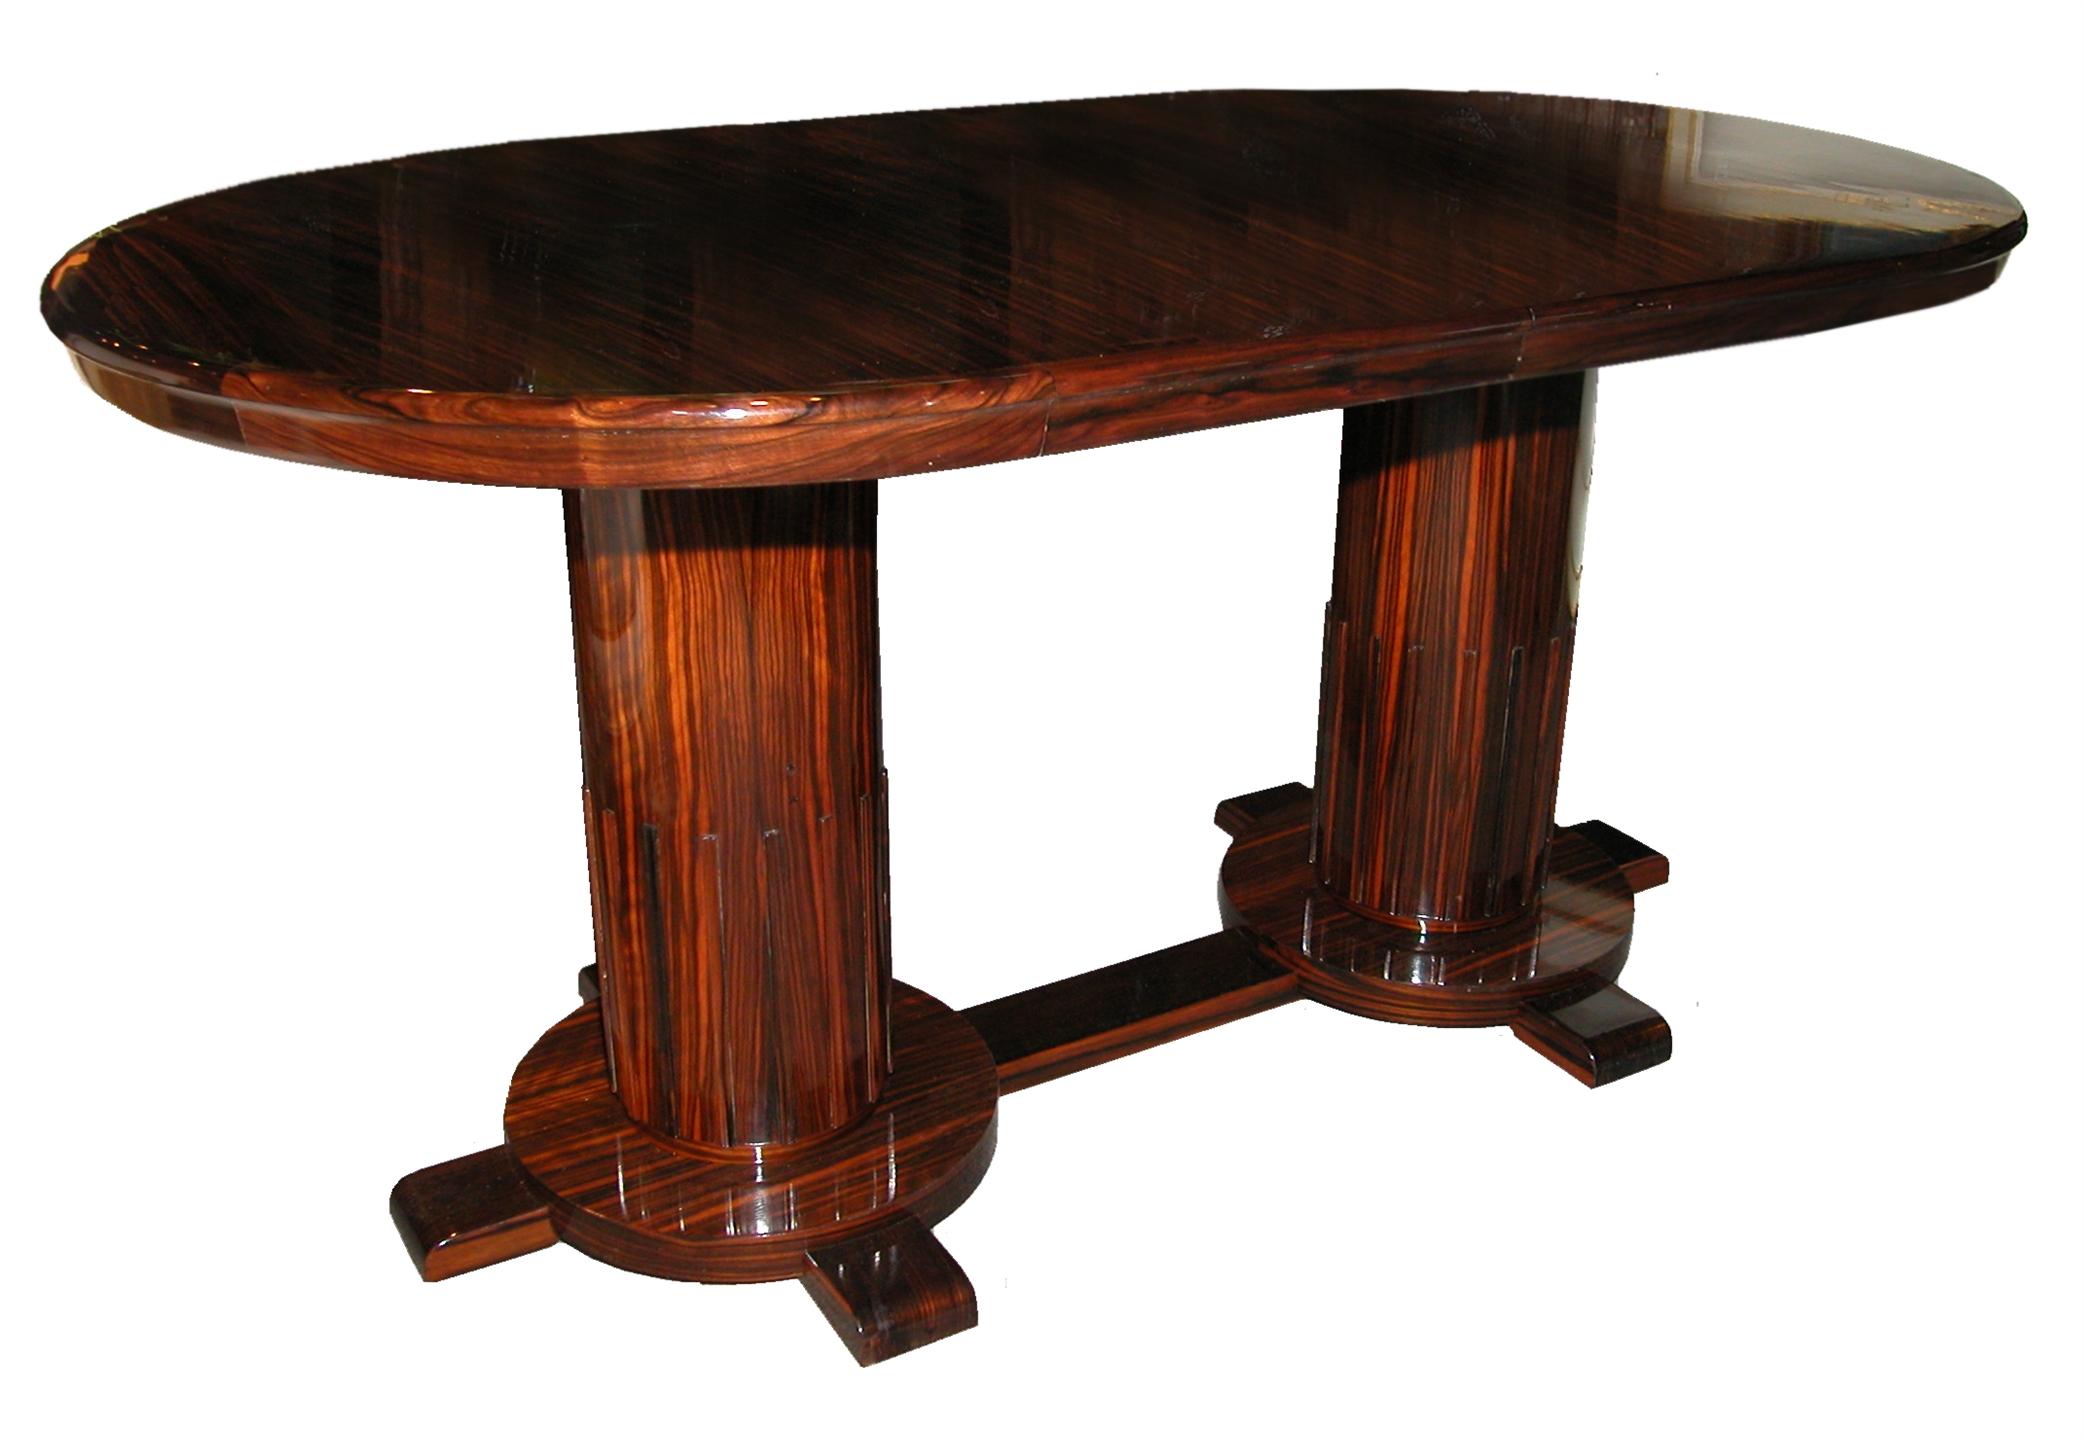 126/2013 - French Art Deco Extension Table